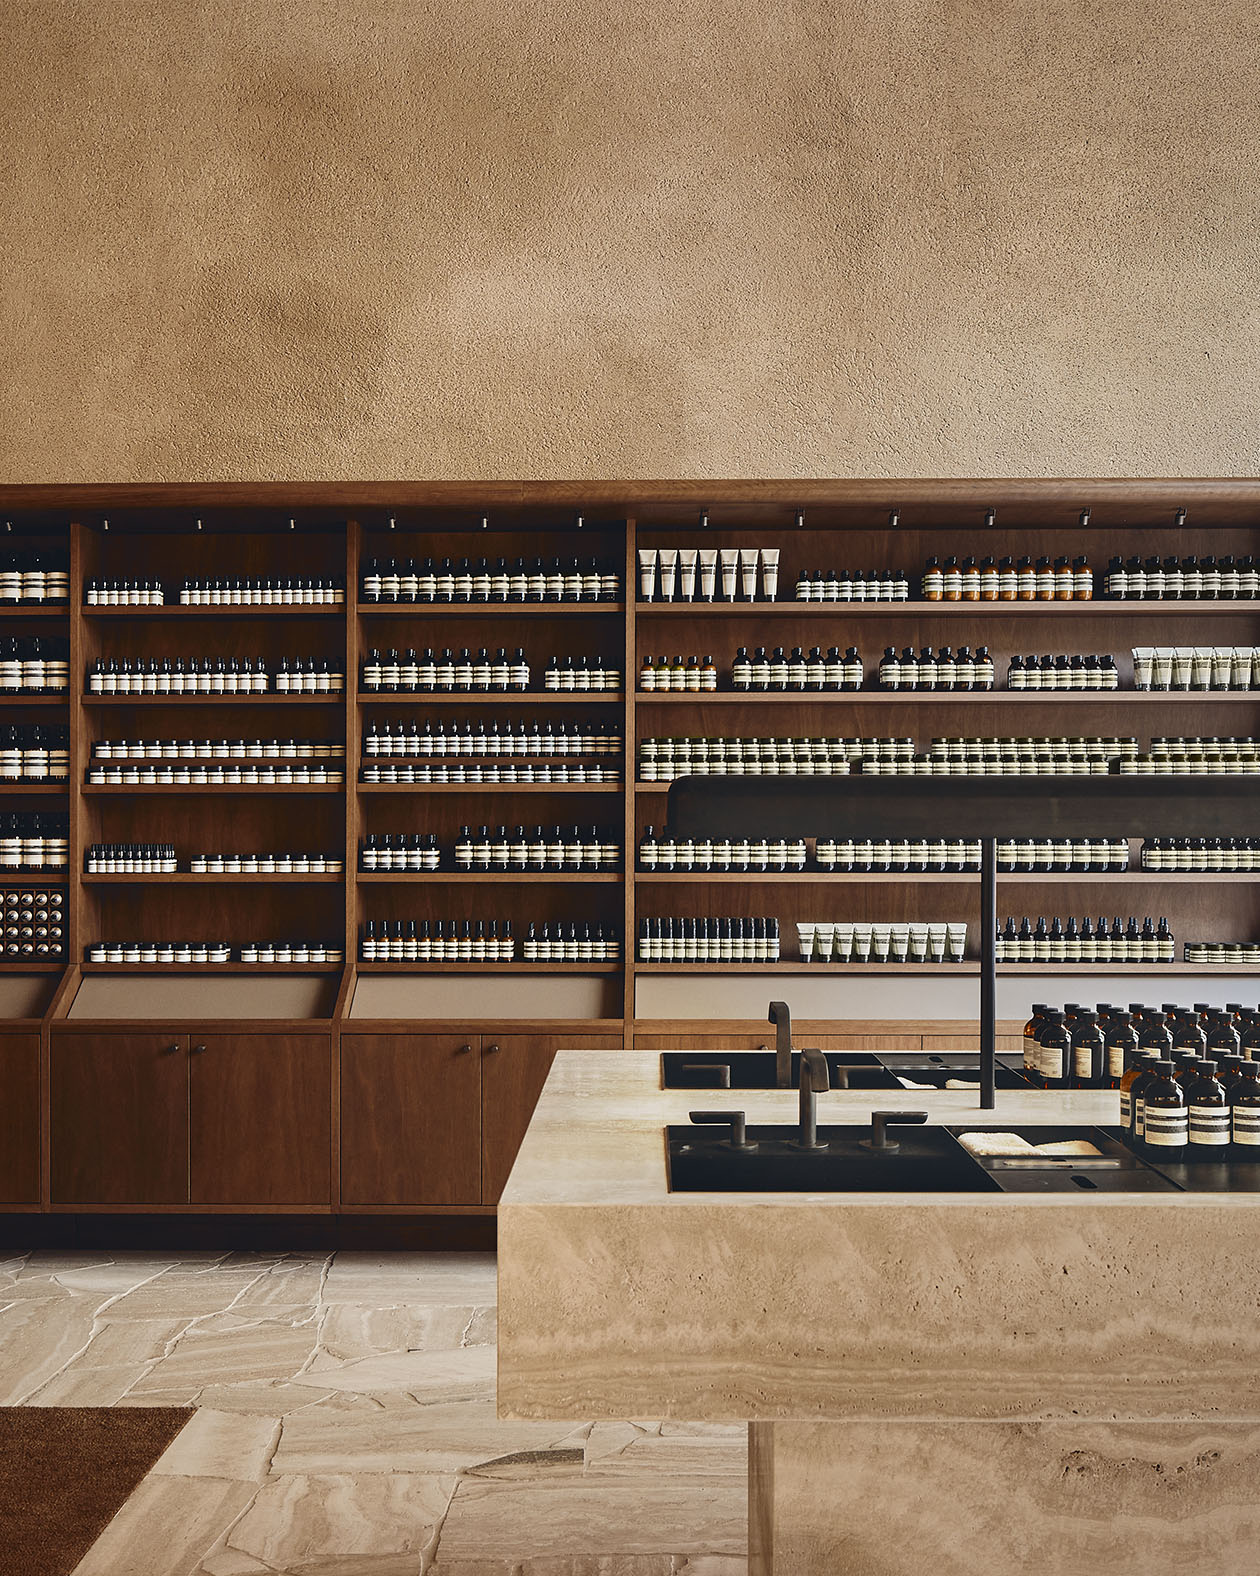 Travertine sink sits in the foreground; dark walnut wooden shelves holding Aesop product featured in the background.